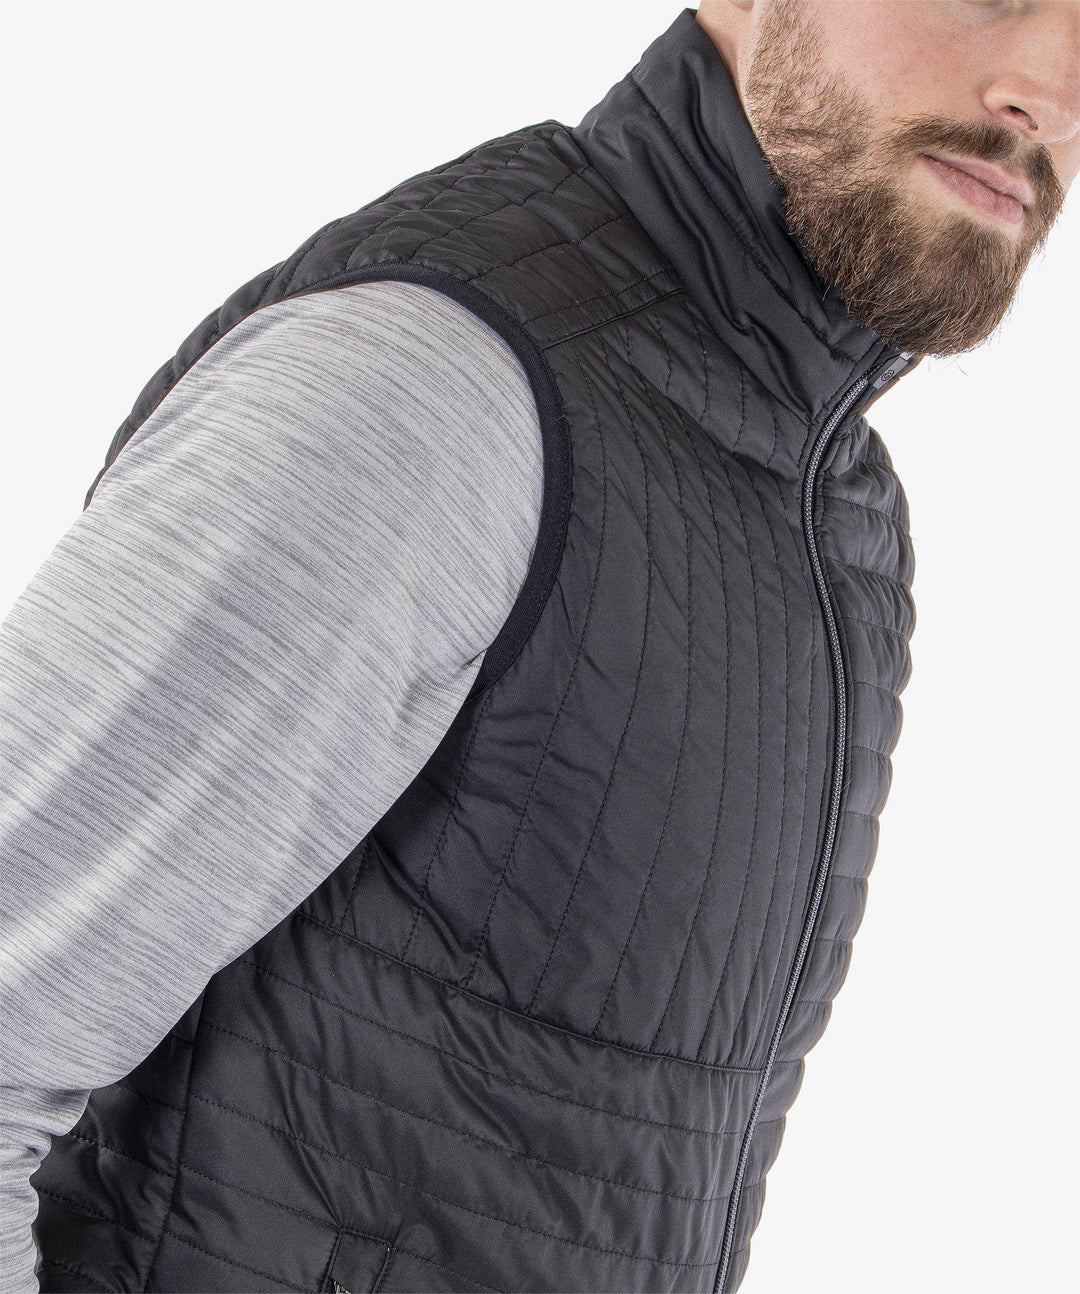 Leroy is a Windproof and water repellent golf vest for Men in the color Black(4)